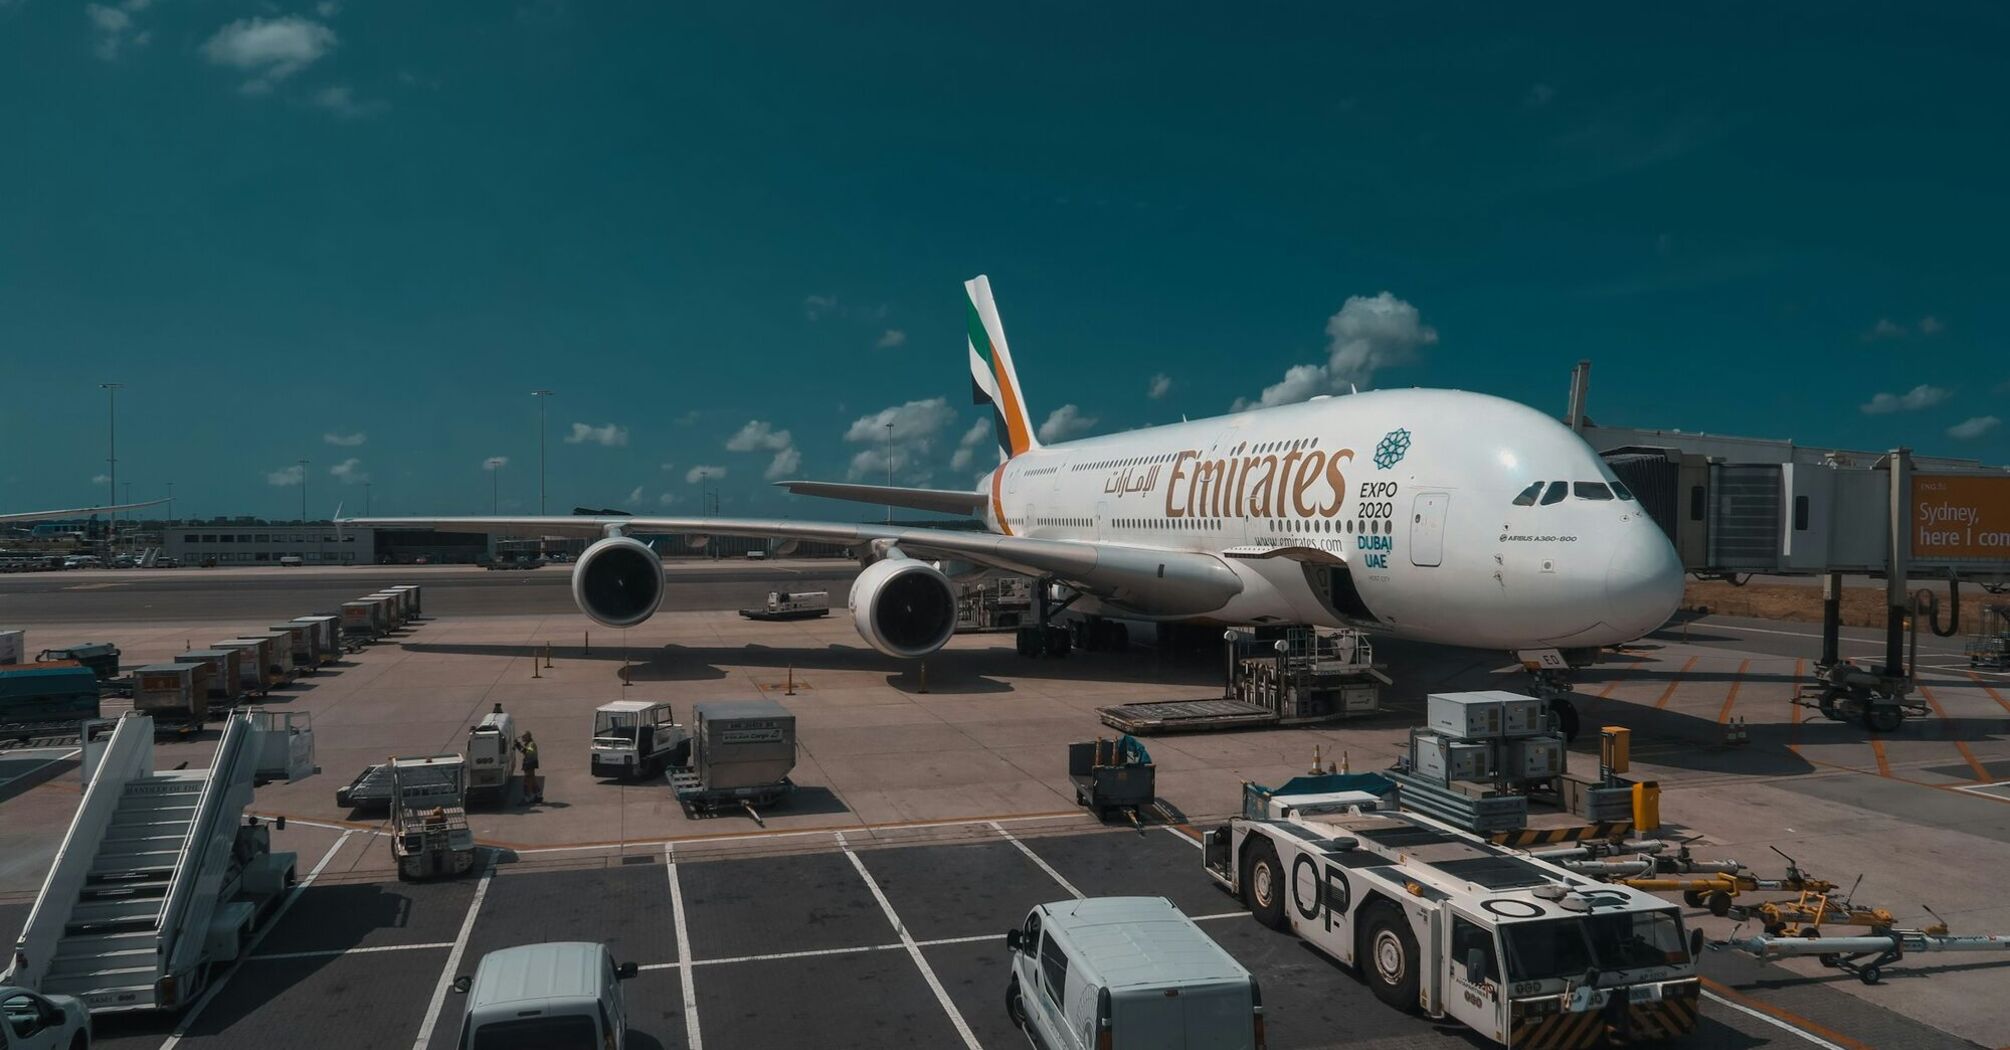 Emirates Airbus A380 at airport gate